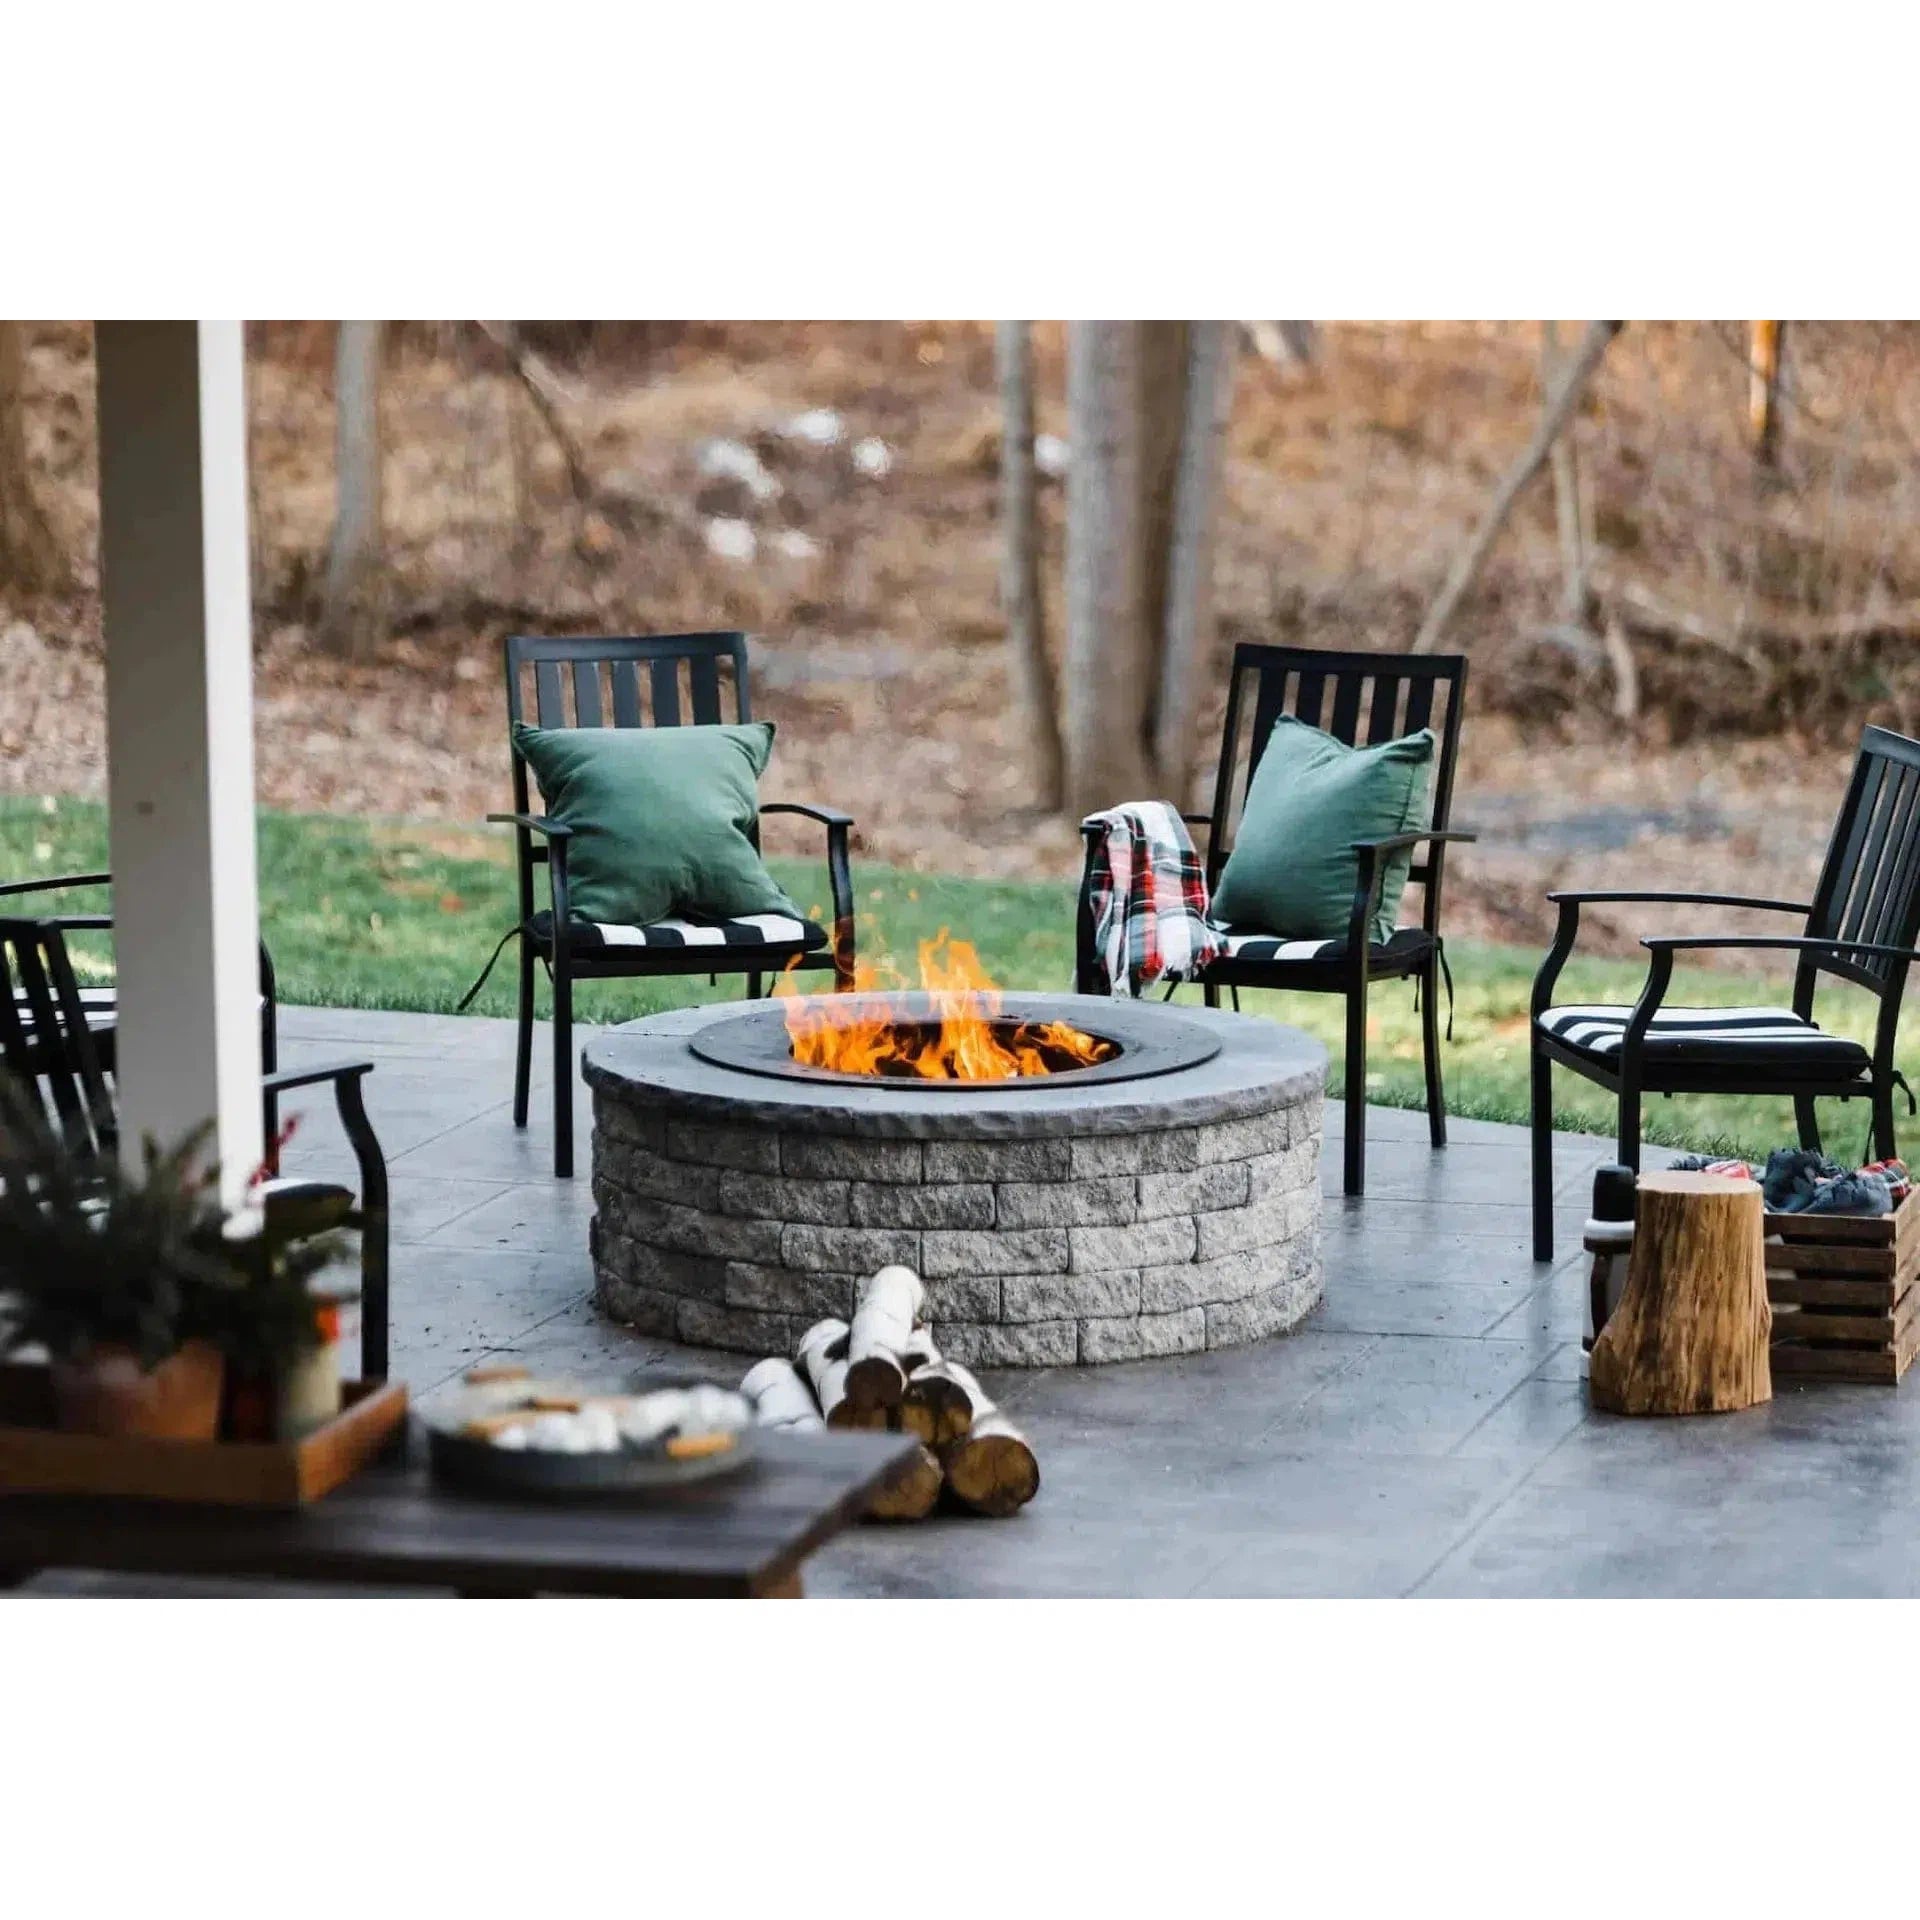 Zentro 30" Round Stainless Steel Smokeless Fire Pit Insert with Lid